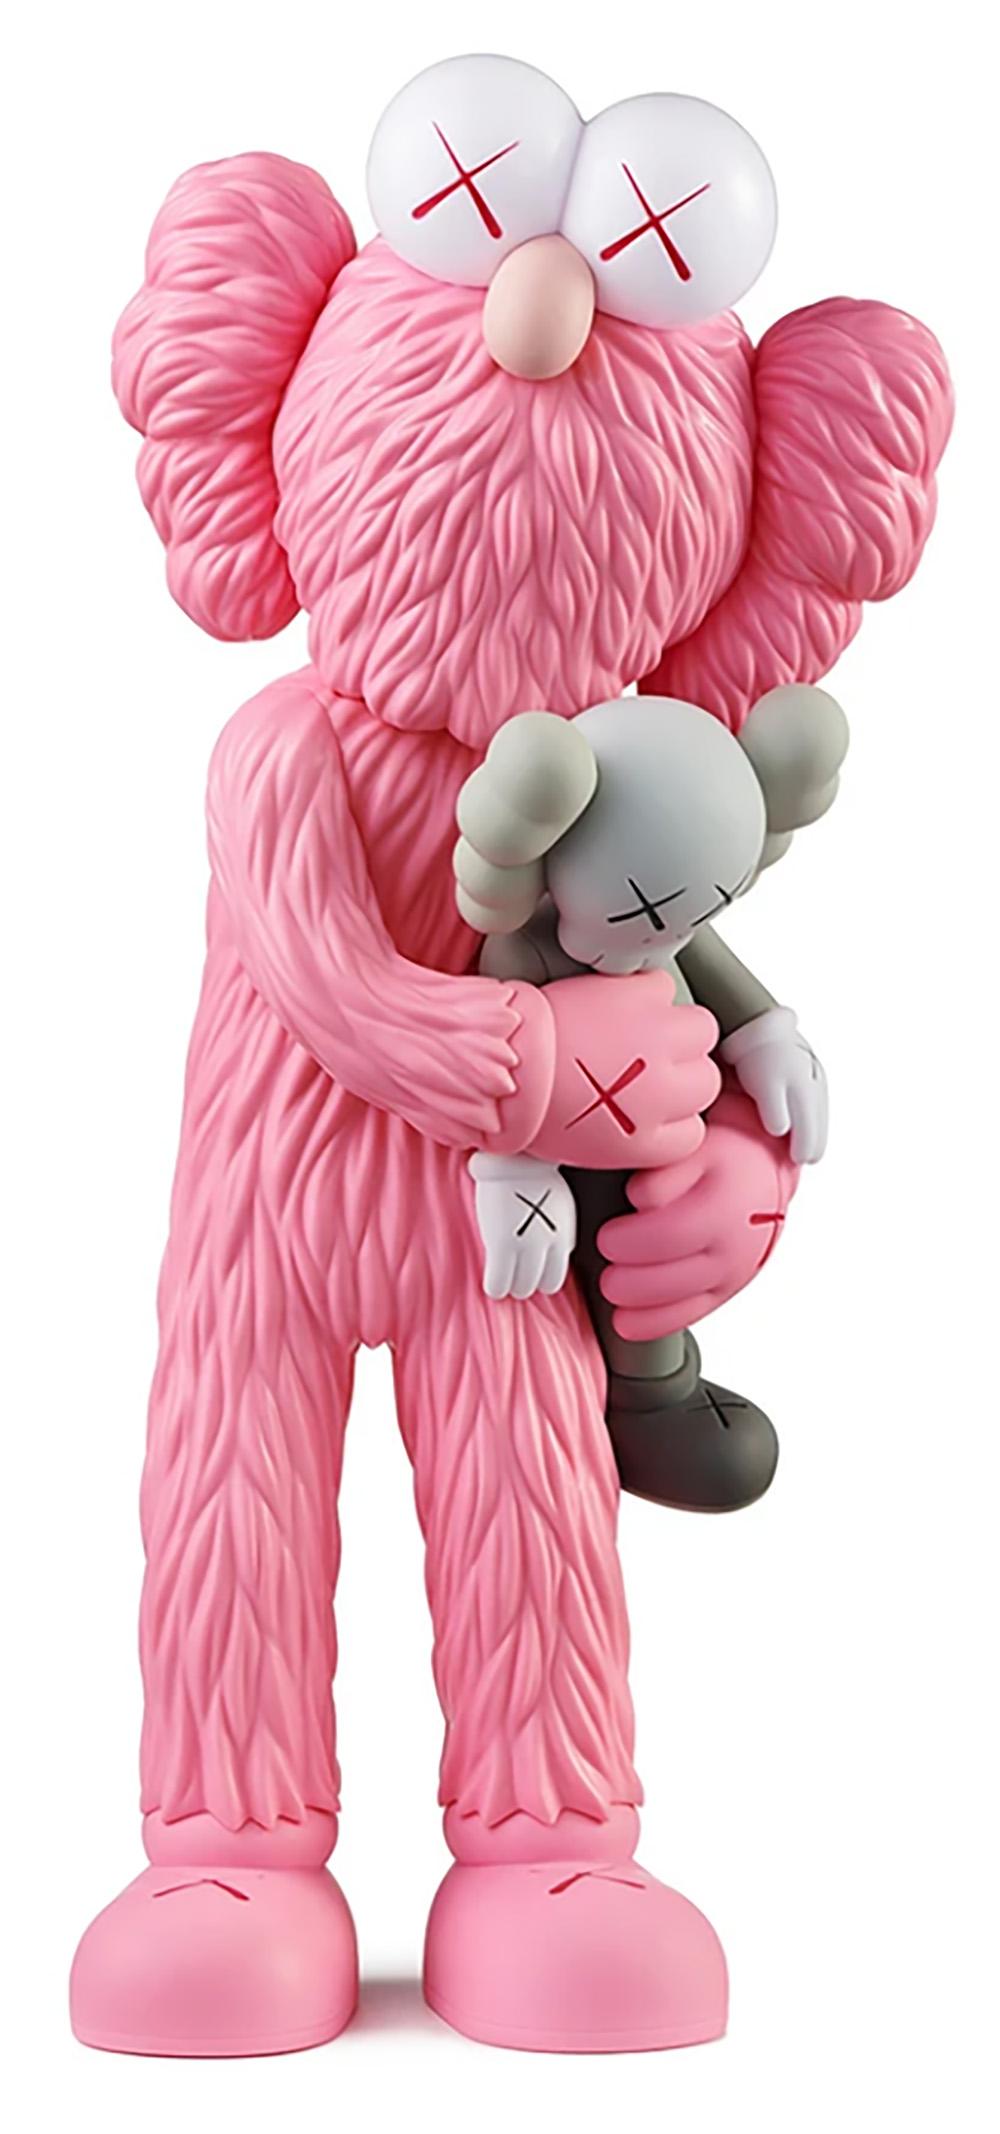 KAWS TAKE (Pink) figurative sculpture new & unopened in its original packaging. 
A well-received work and variation of KAWS' large scale TAKE sculpture - a key highlight of the exhibition, 'KAWS BLACKOUT at Skarstedt Gallery London in 2019 - the